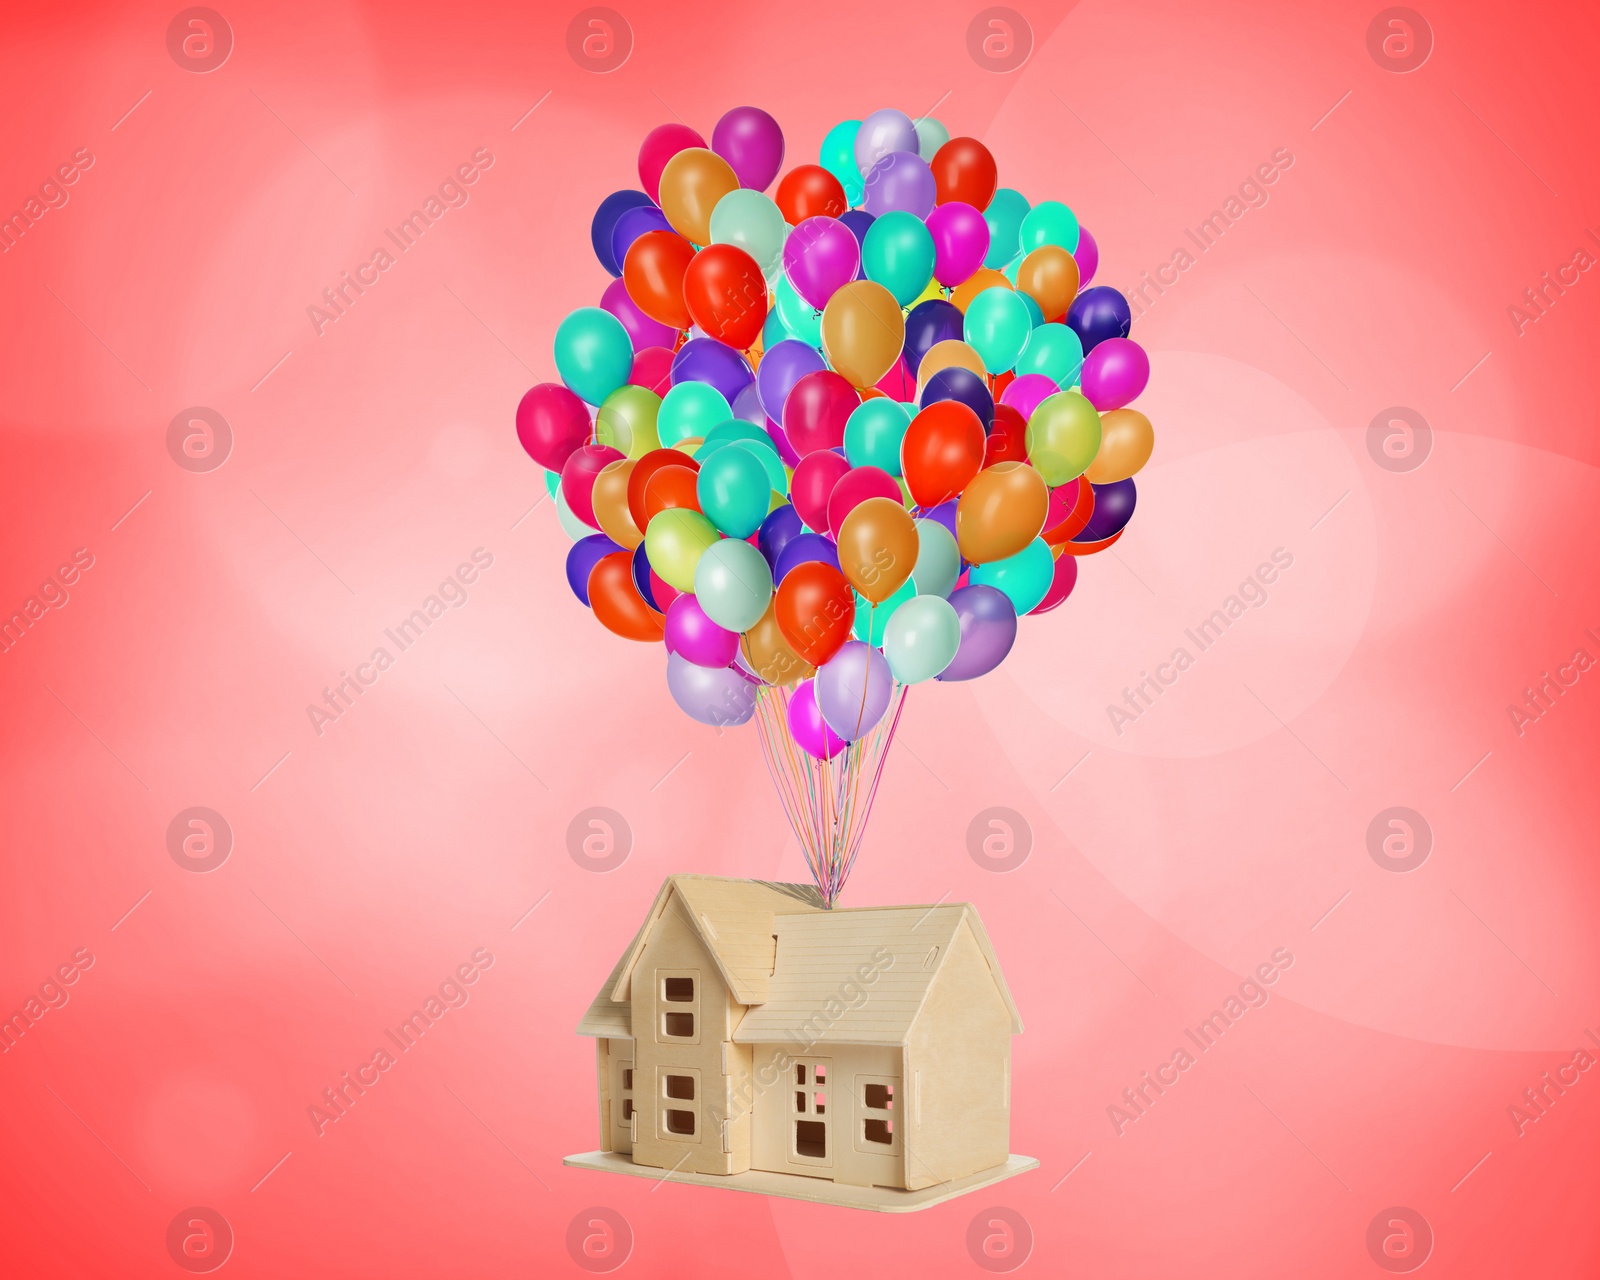 Image of Many balloons tied to model of house flying on red background